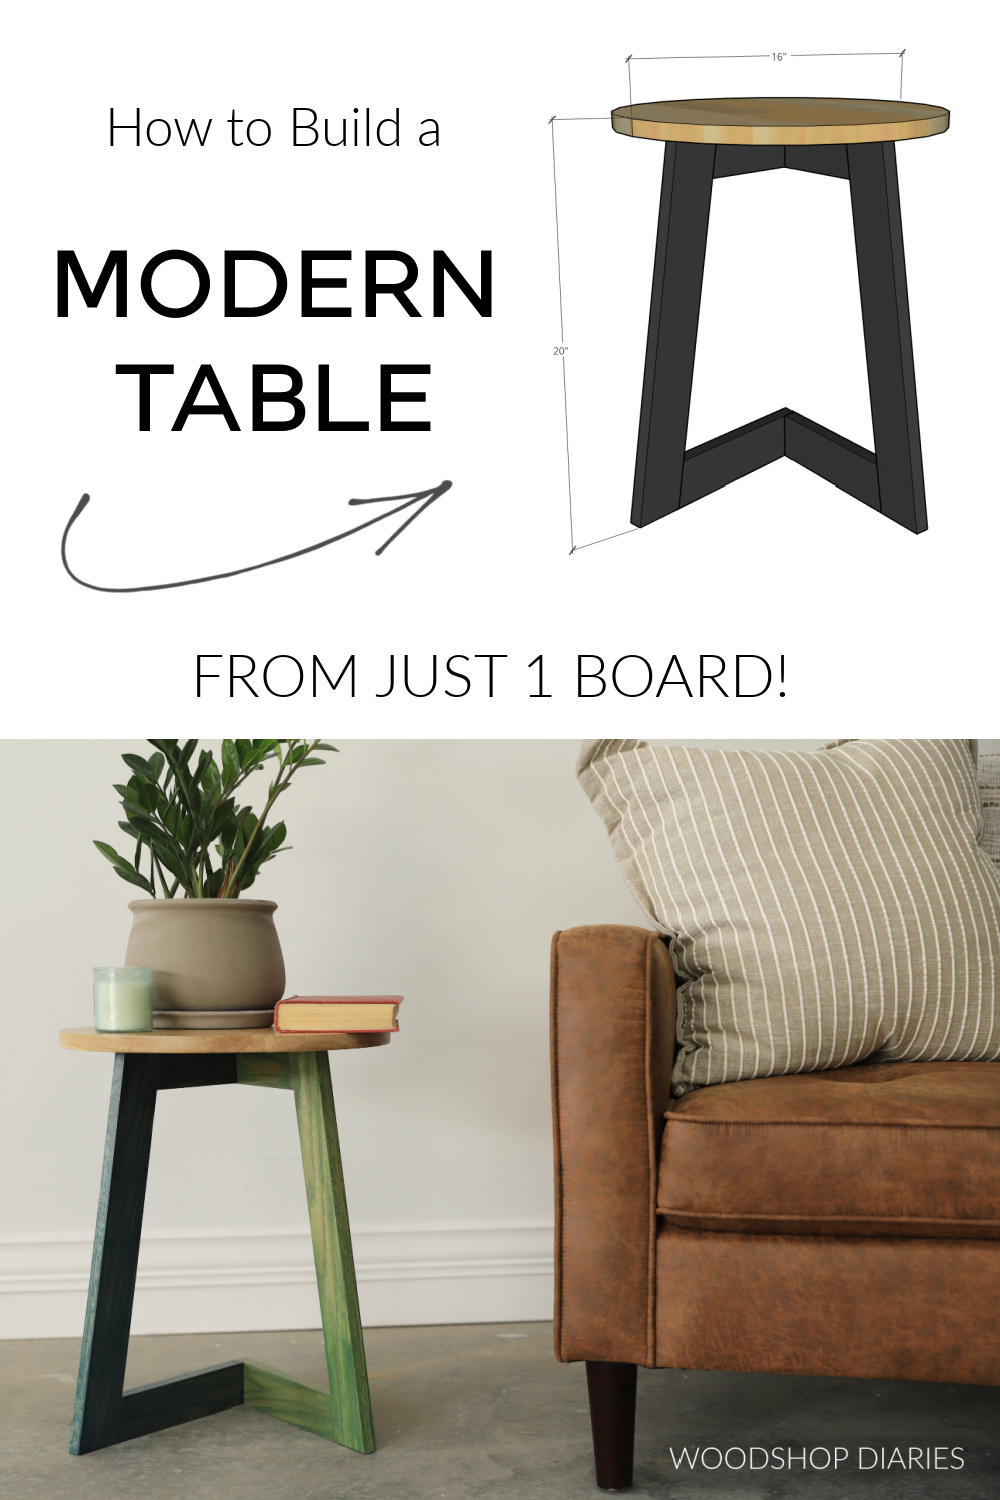 Pinterest collage image showing dimensional C table diagram at top and modern side table next to chair at bottom with text "how to build a modern table from just 1 board"